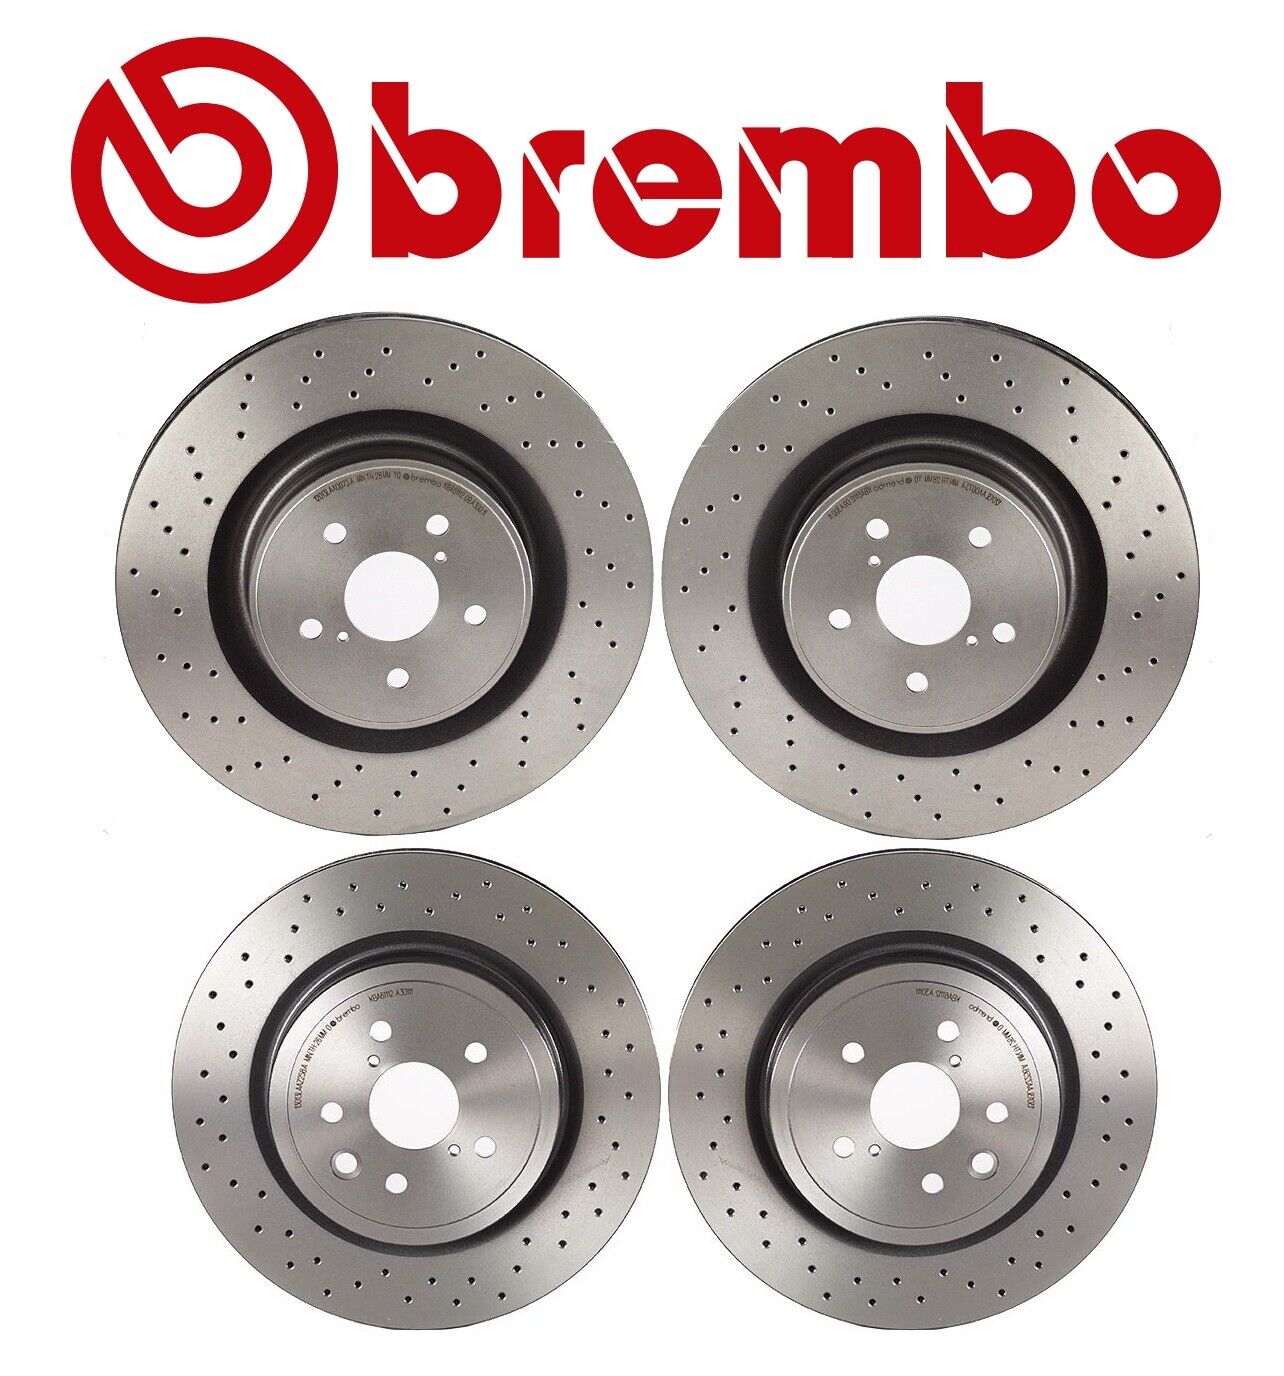 For Lexus IS F 08-14 5.0L V8 Two Front and Two Rear Disc Brake Rotors Kit Brembo